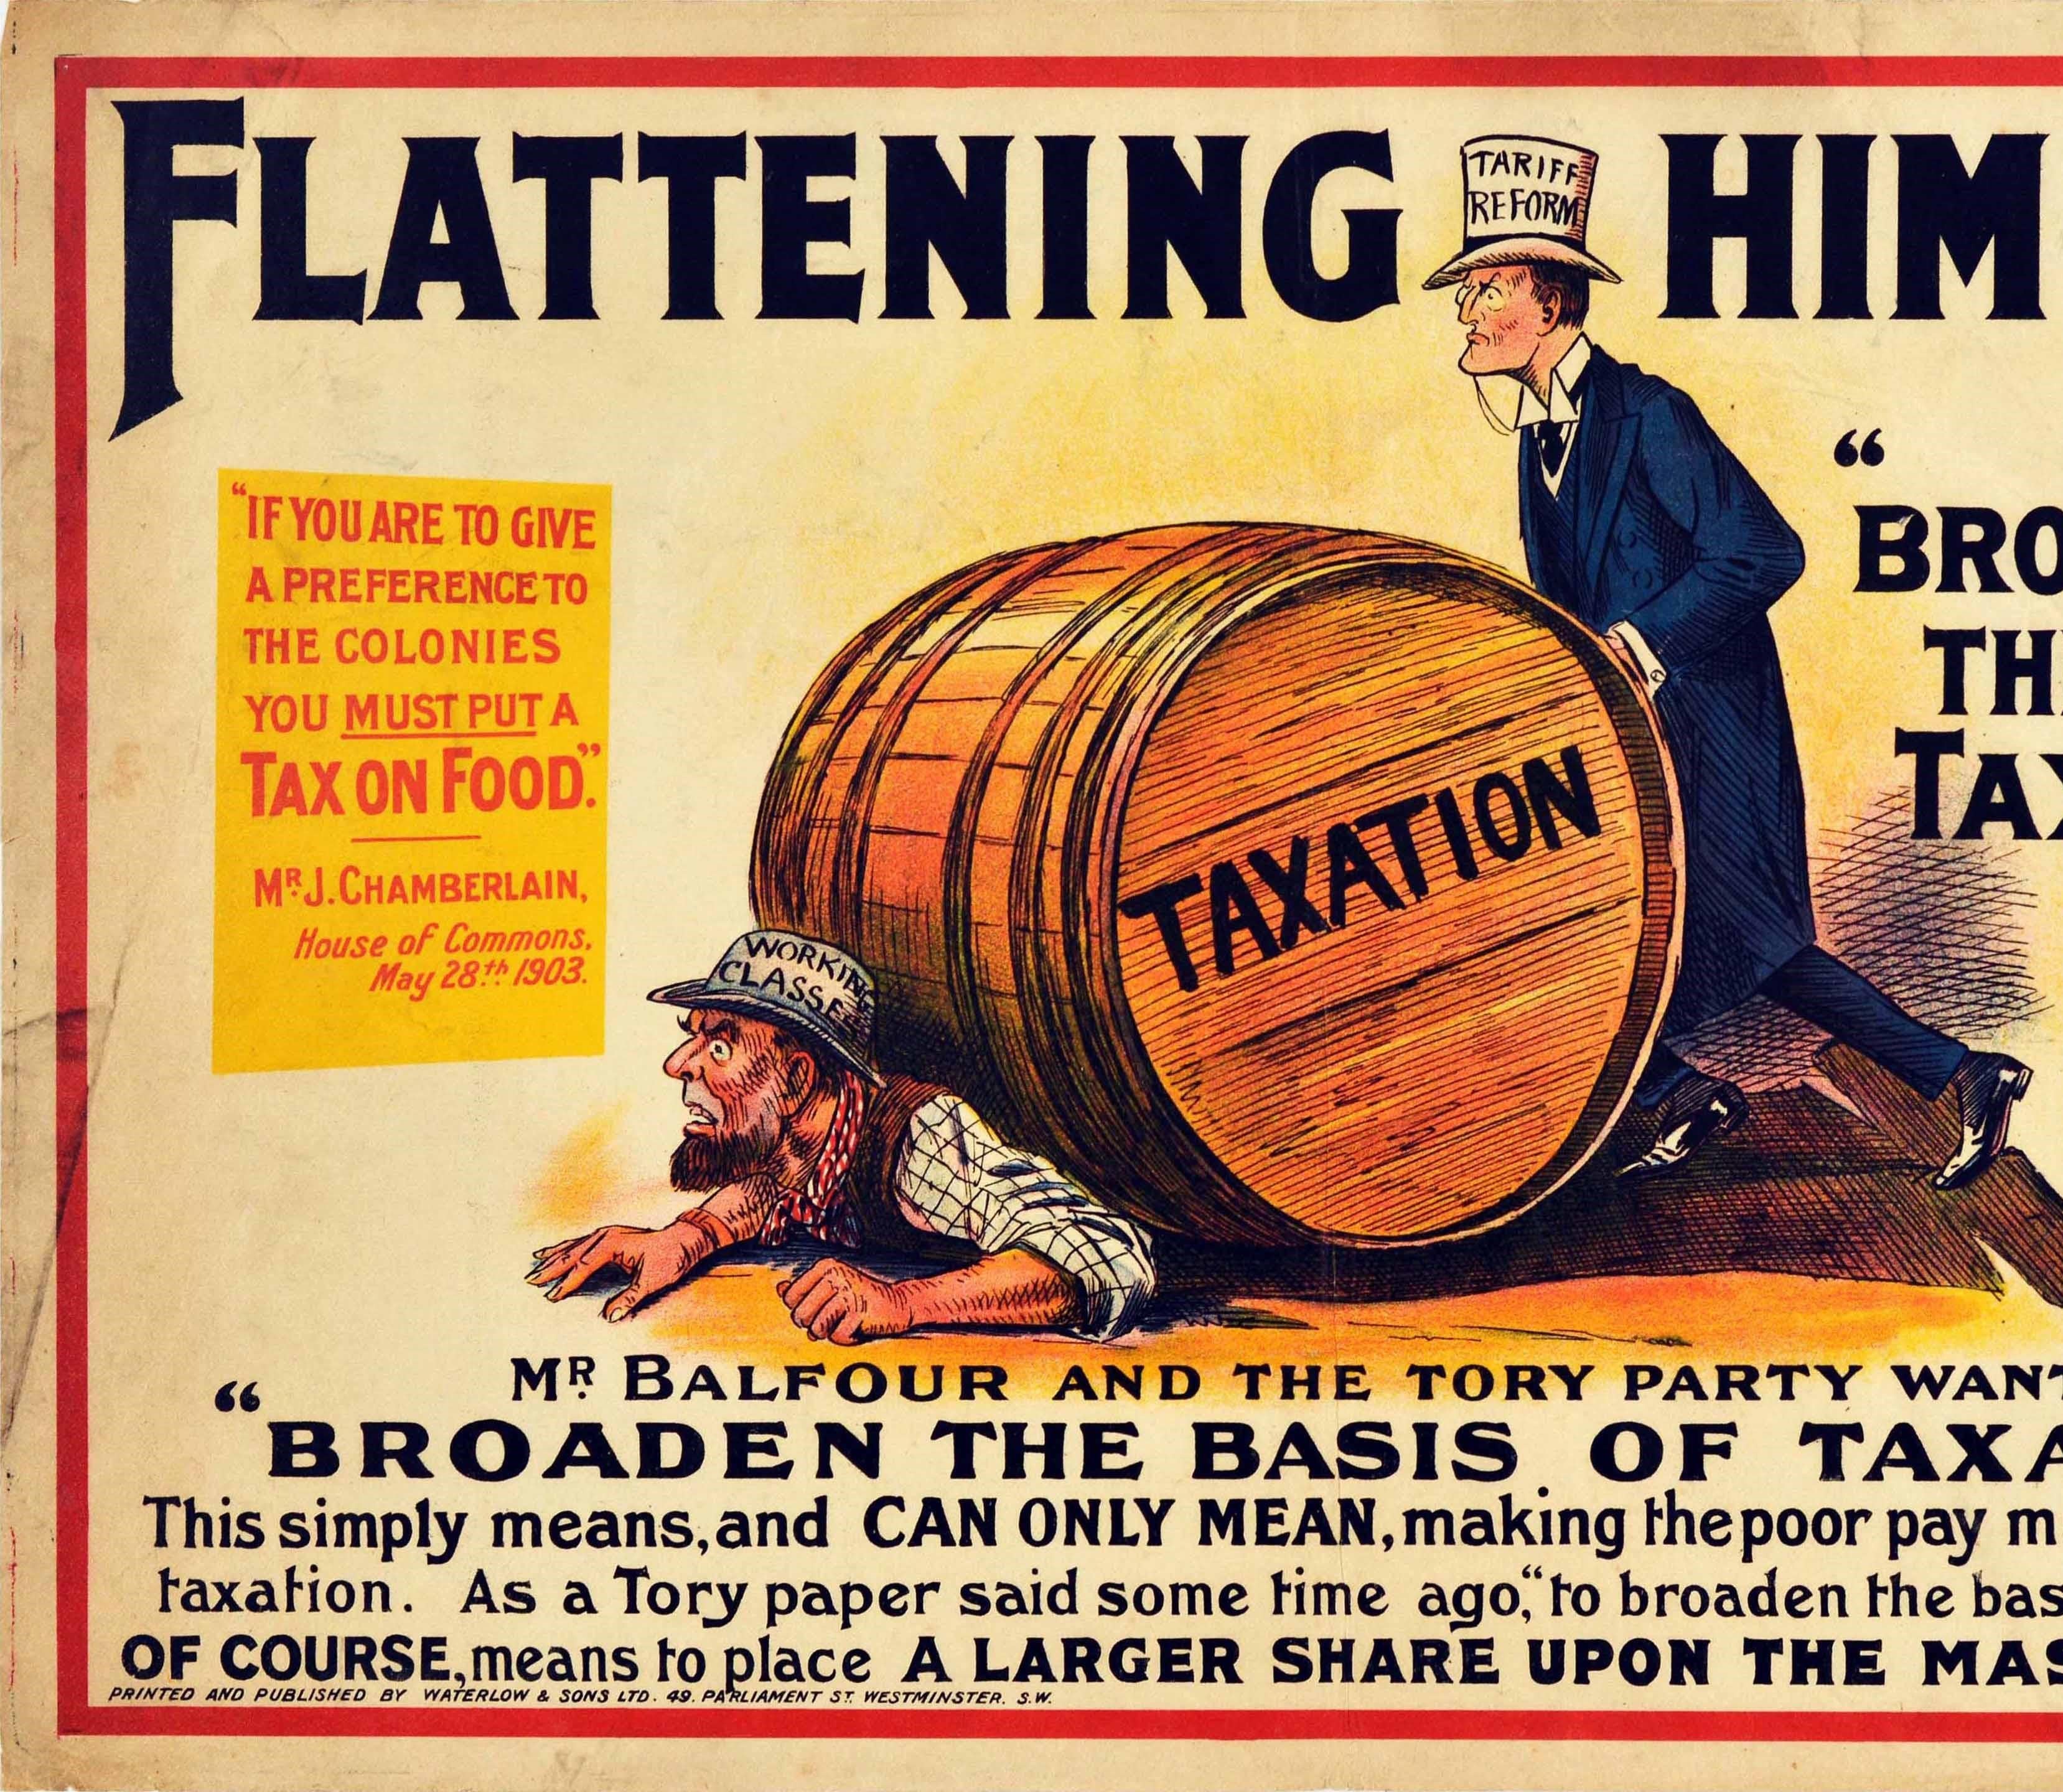 Original antique political election propaganda poster issued by the Liberal Party - Flattening Him Out, Or Broadening the Basis of Taxation - featuring an illustration set within a red line border depicting a Conservative Tory statesman wearing a